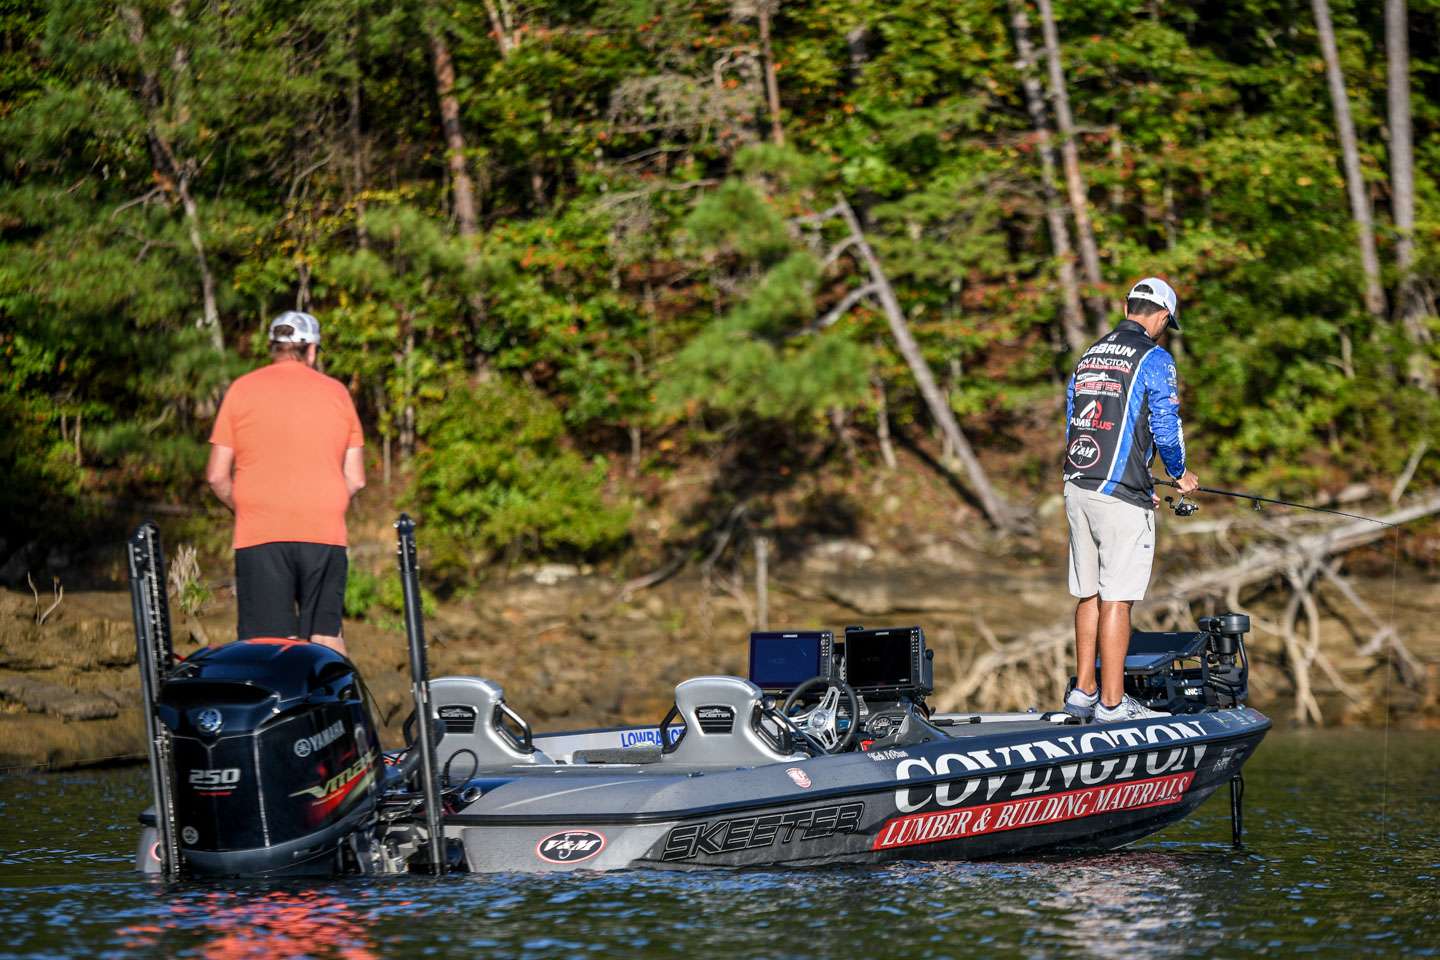 See how early Day 2 fared for Nick LeBrun at the Basspro.com Bassmaster Open at Lewis Smith Lake.